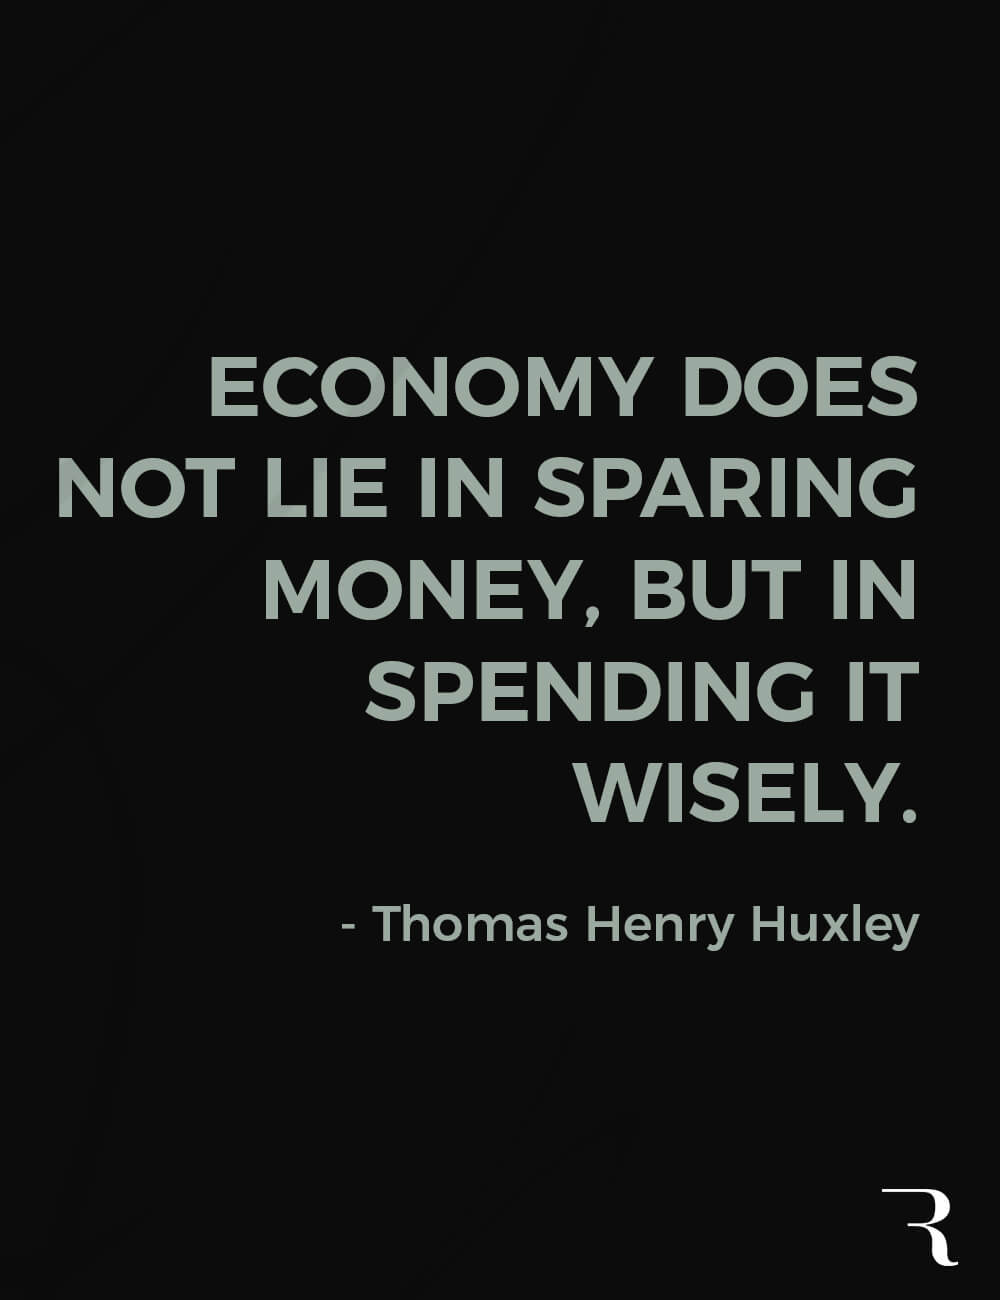 Motivational Quotes: “Economy does not lie in sparing money, but in spending it wisely.” 112 Motivational Quotes to Be a Better Entrepreneur